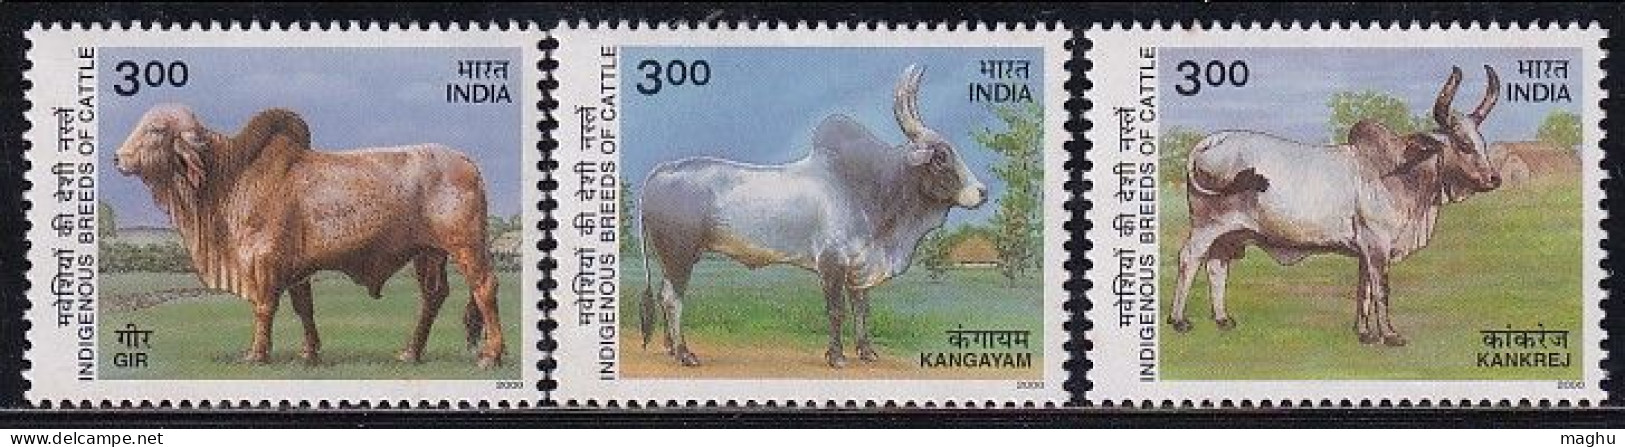 3 Diff., Breeds Of Cattle, India MNH 2000,, Farm Animal, Cow, Cond., Margnal Stains - Ungebraucht